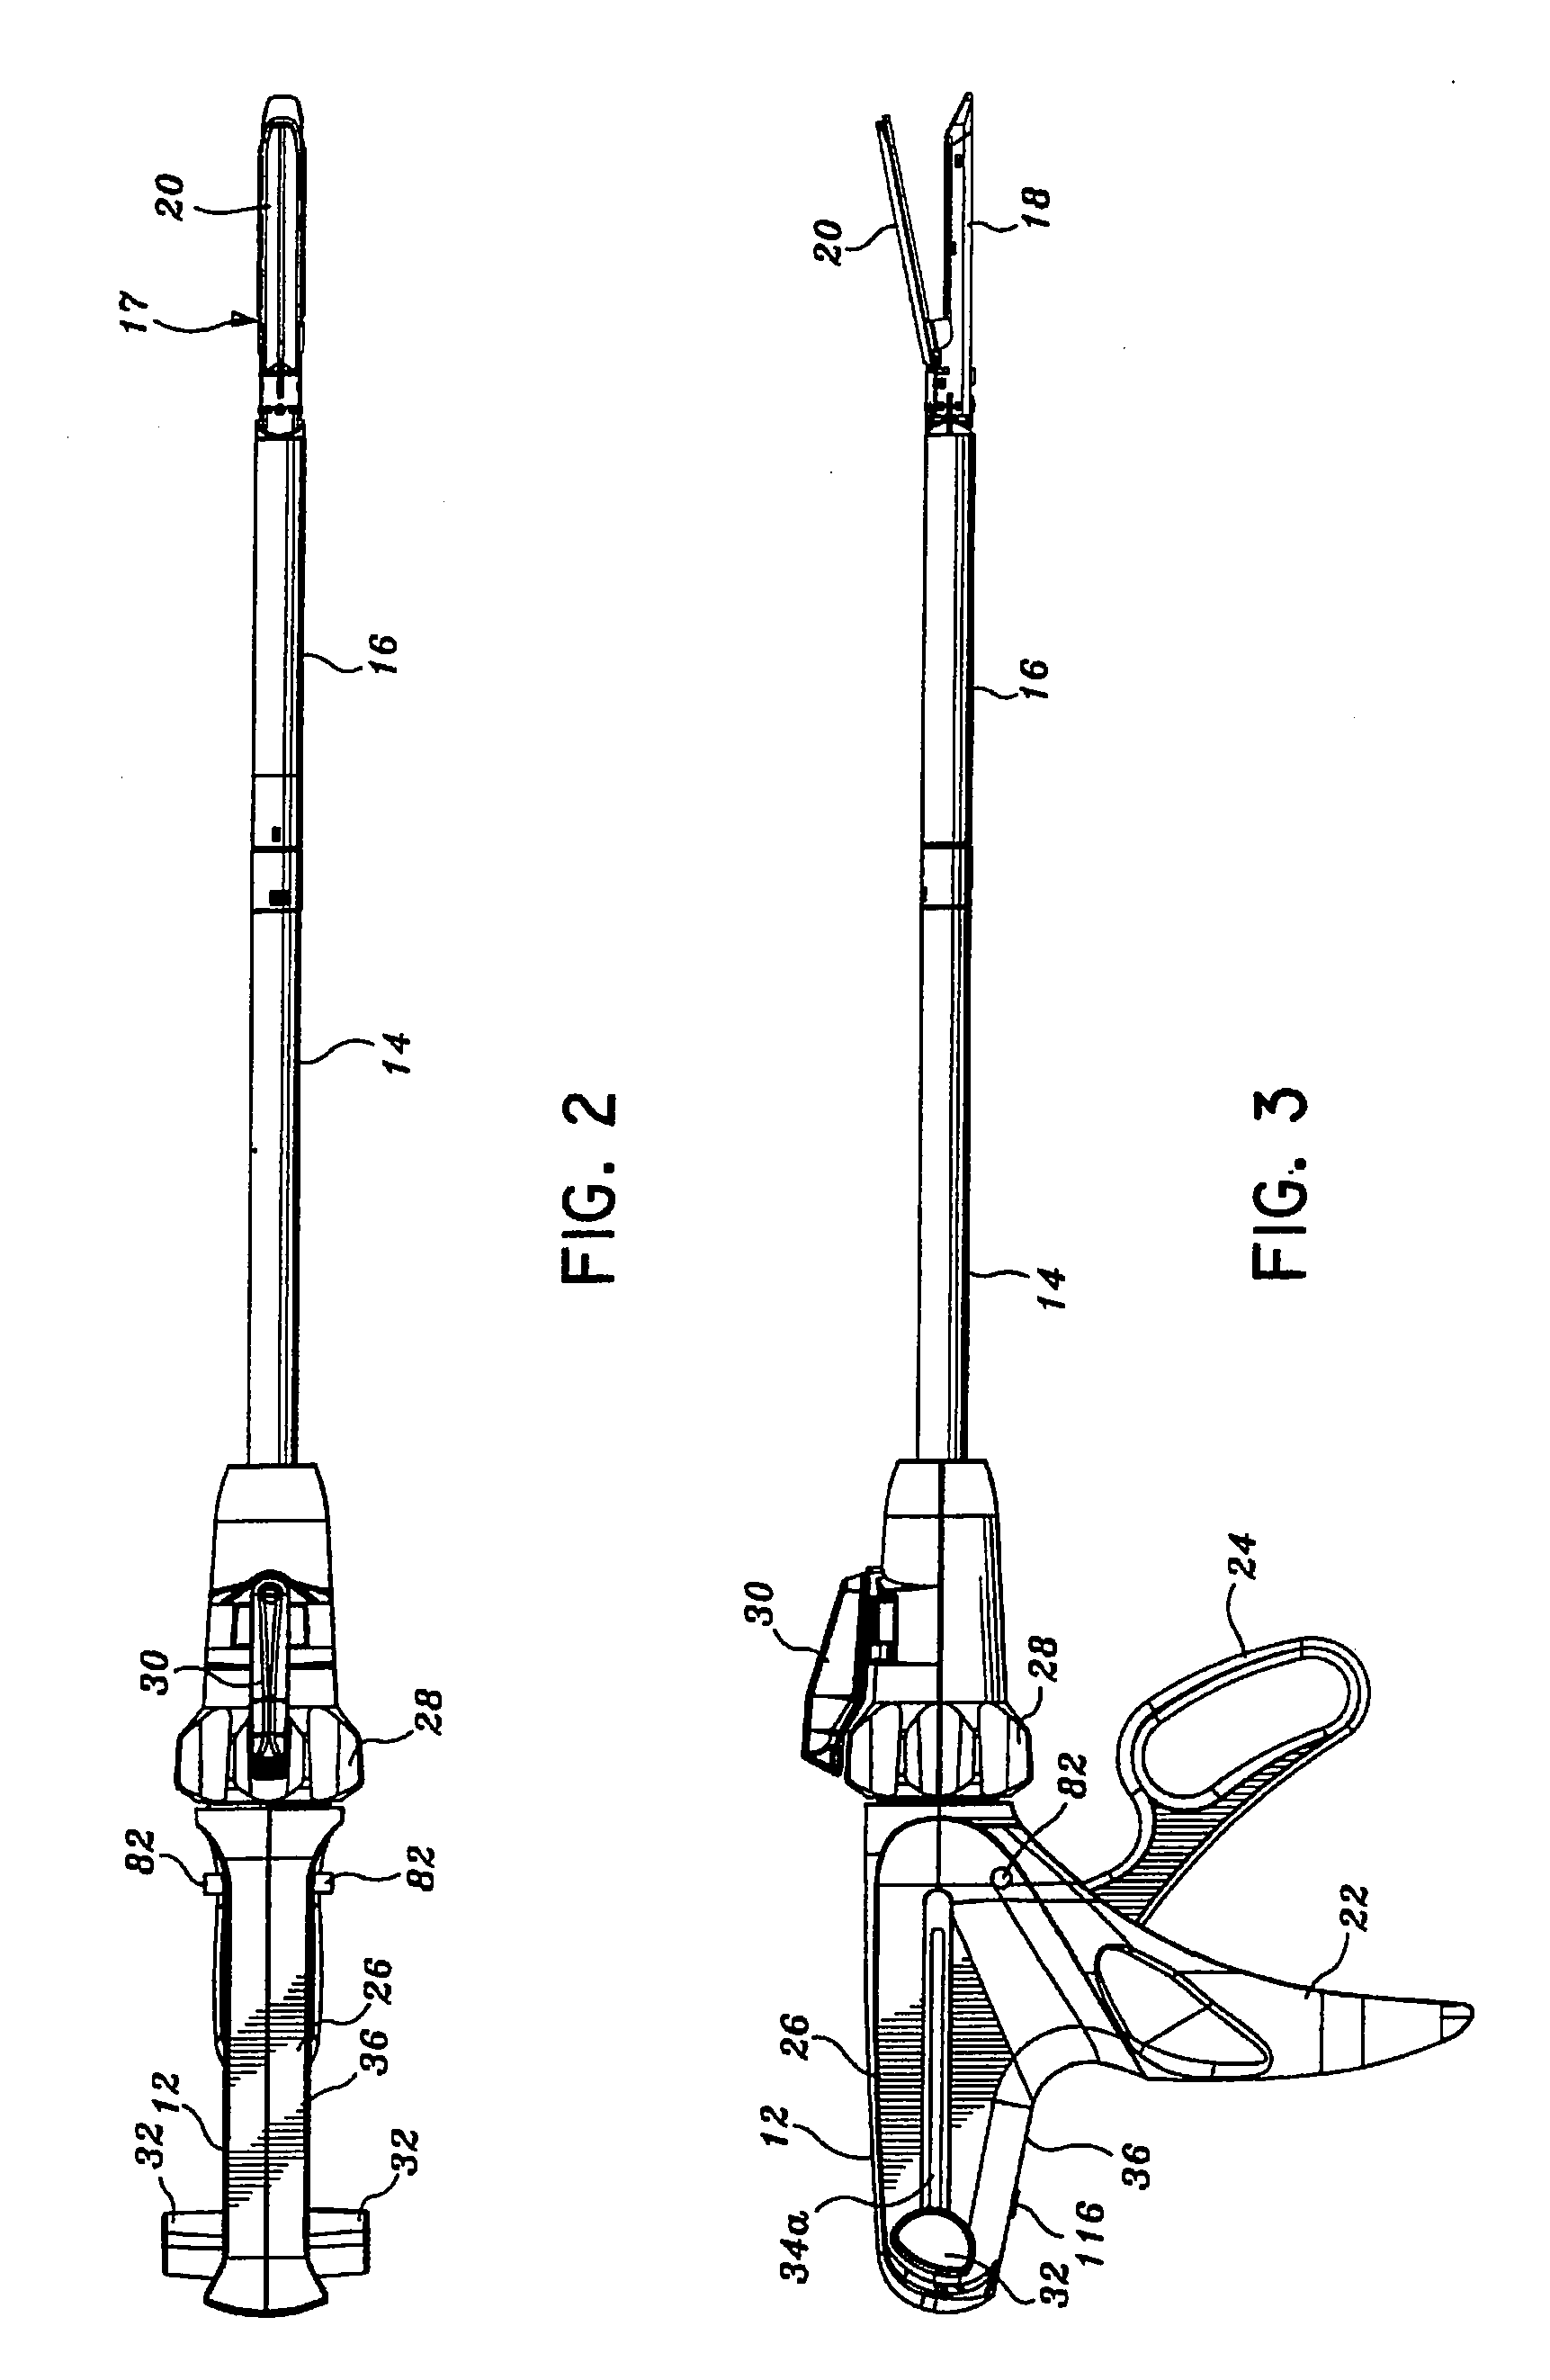 Disposable loading units for a surgical cutting and stapling instrument